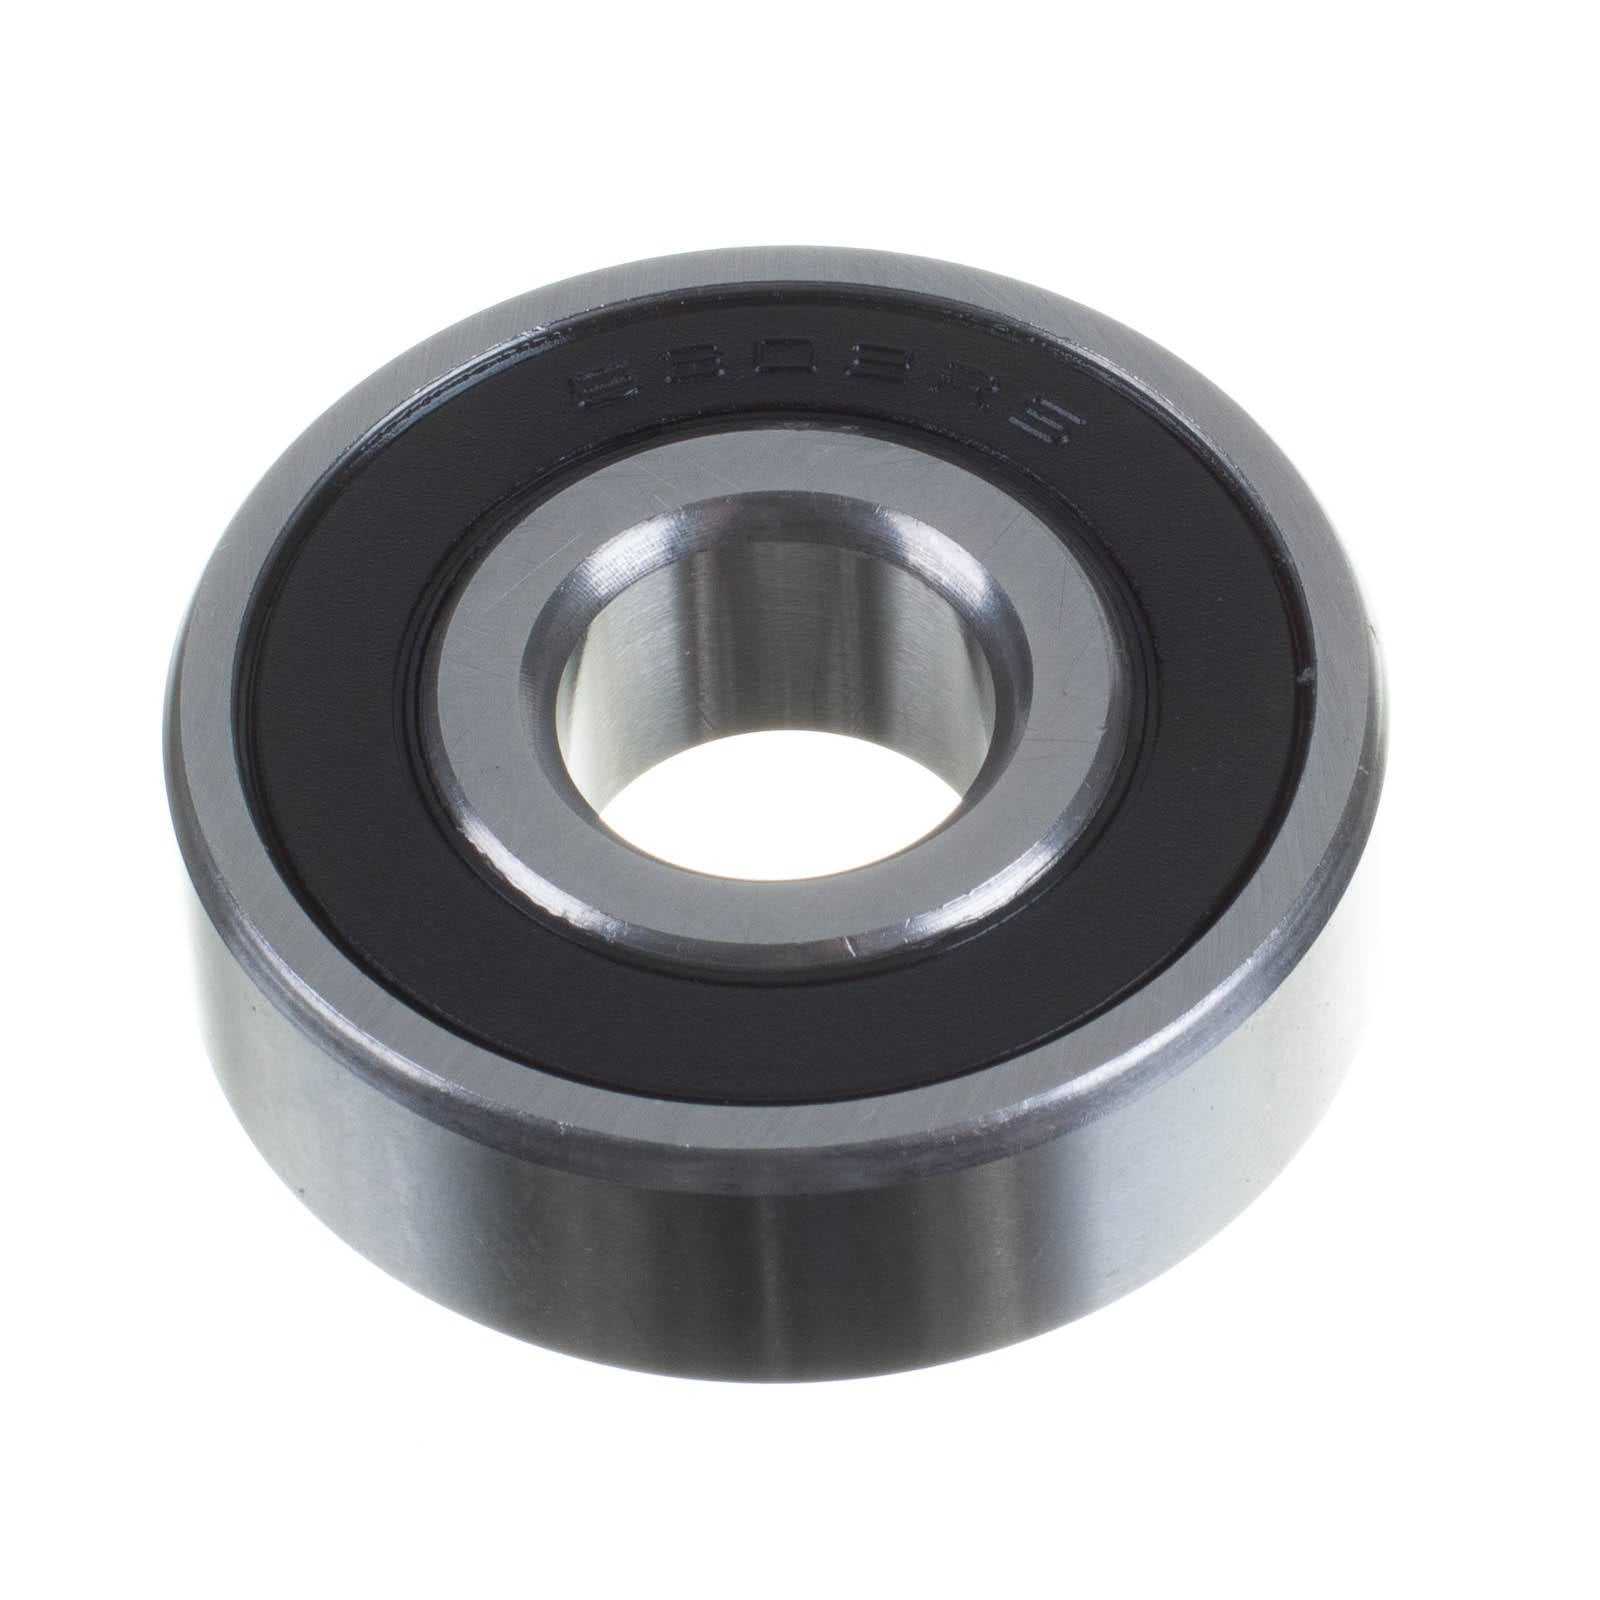 Whites Motorcycle Parts, BEARING 6302-2RS 1 PCE/EACH